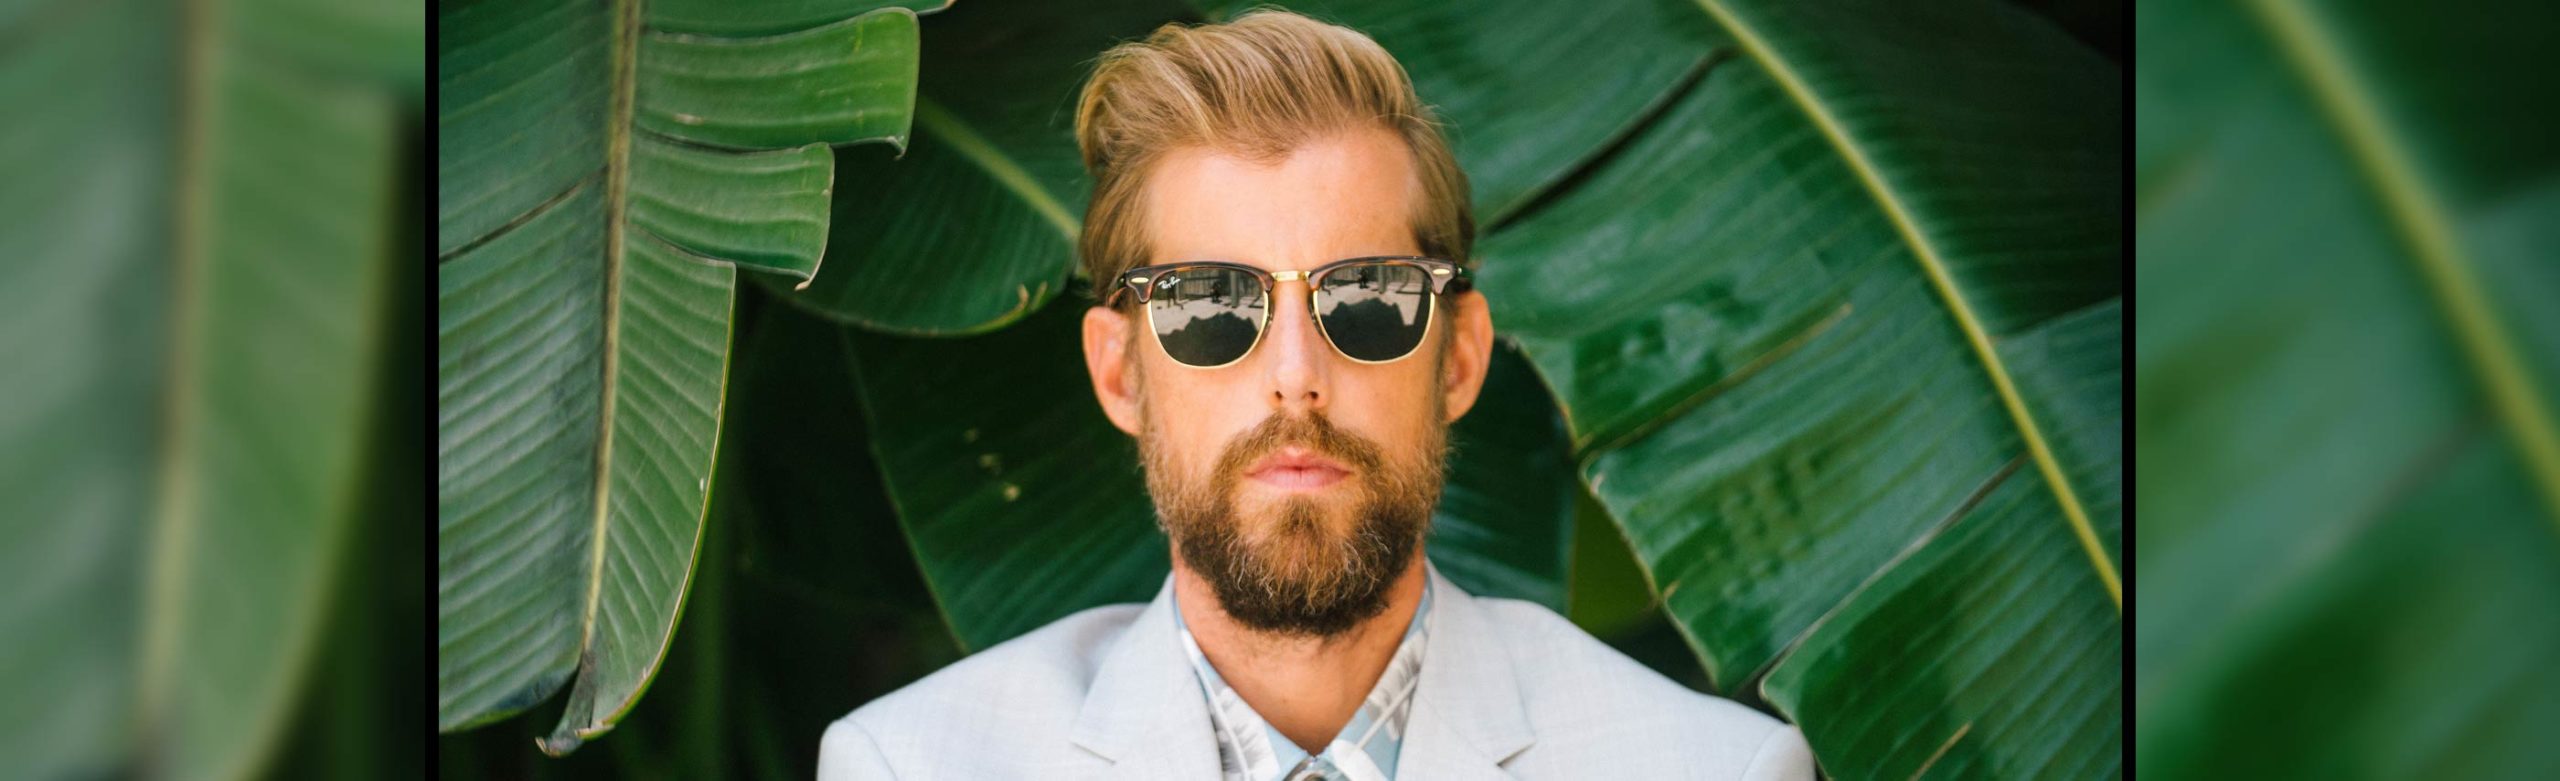 HOLIDAY DISCOUNT: Andrew McMahon in the Wilderness Tickets 30% Off Image